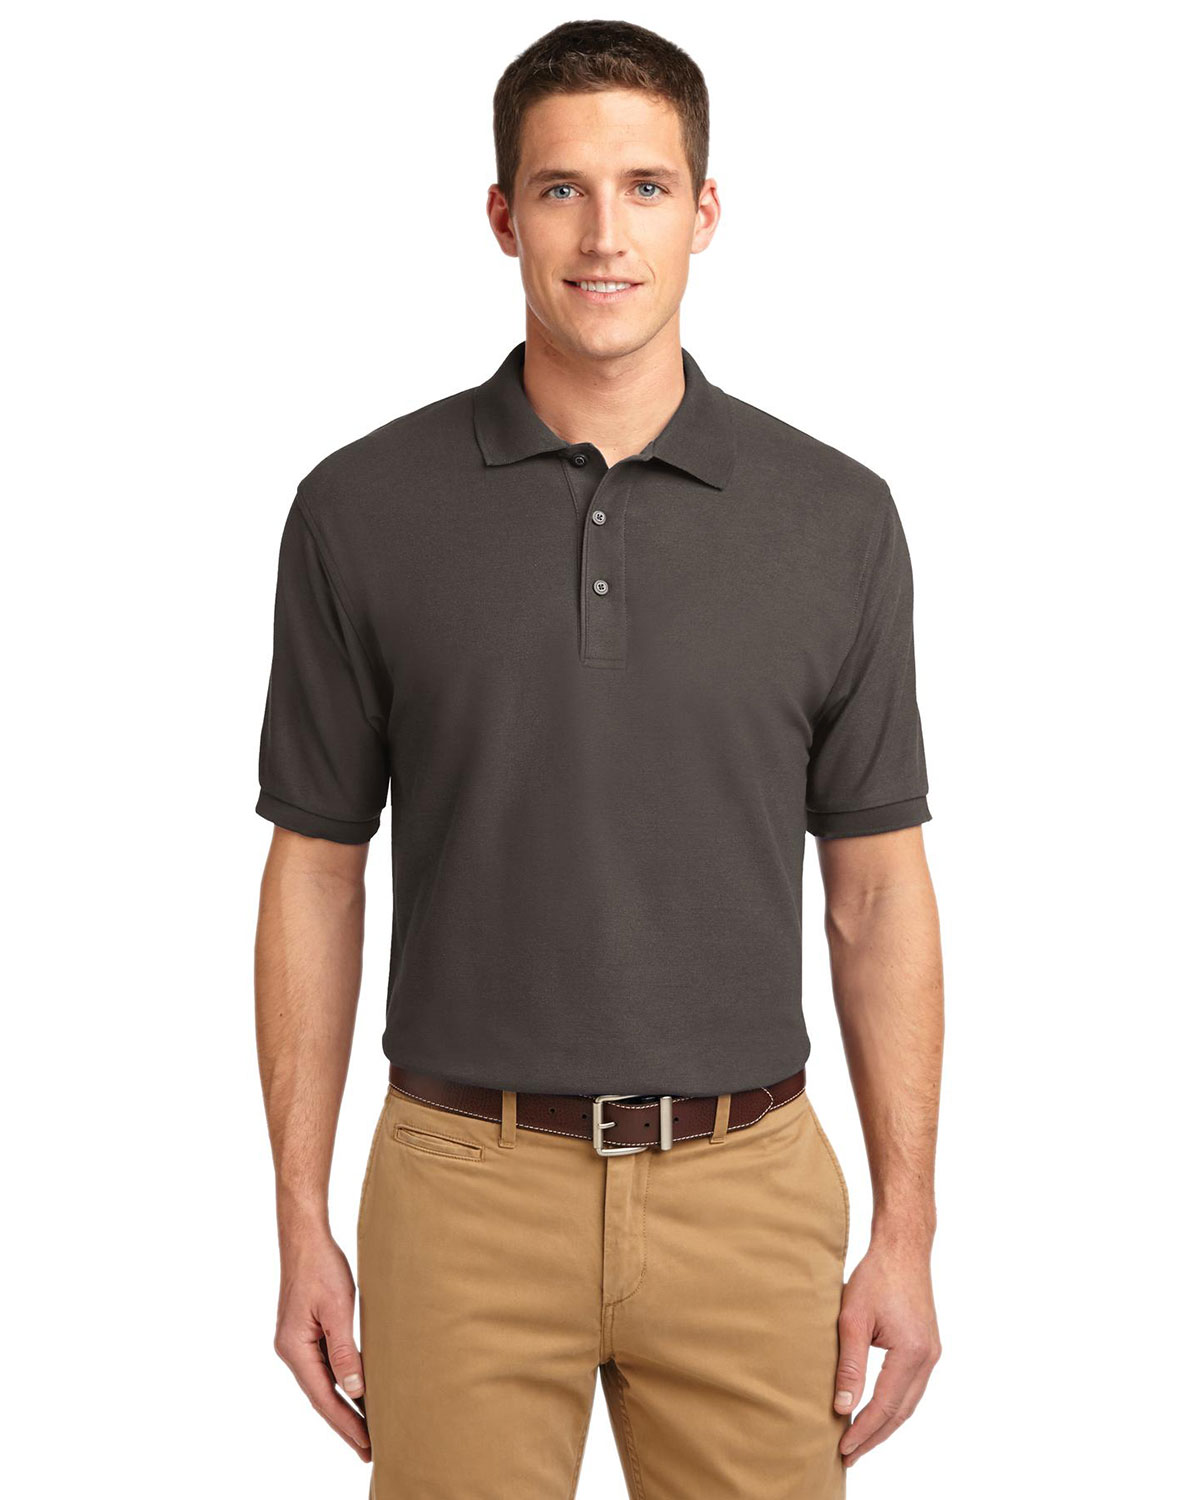 Port Authority K500 Men Silk Touch Polo at Apparelstation